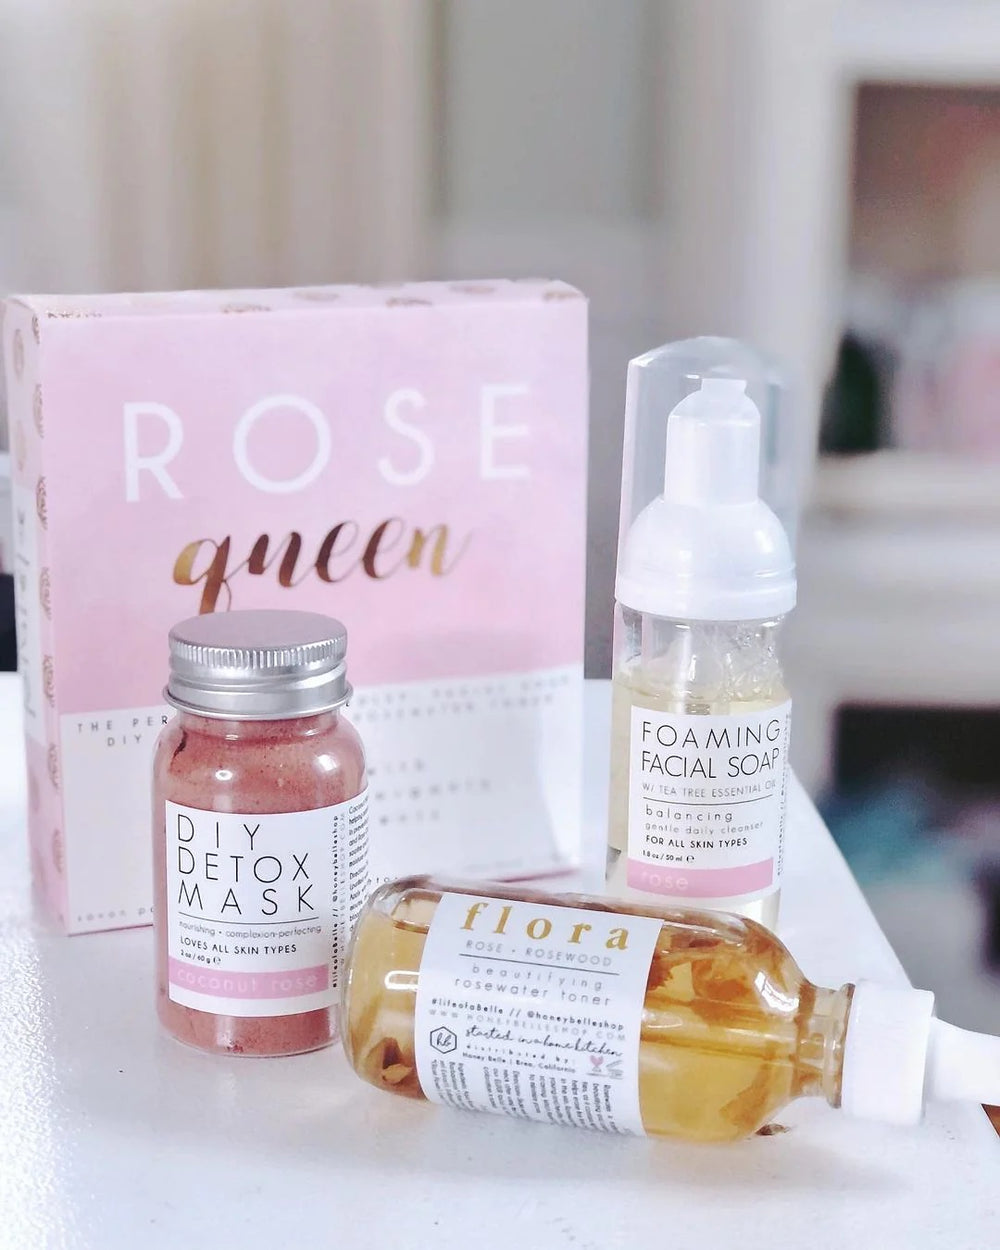 Rose Queen Kit | Honey Belle | Image of the box with contents set on the table in front. DIY Detox Mask, Foaming Facial Soap, and Beautifying rosewater toner.